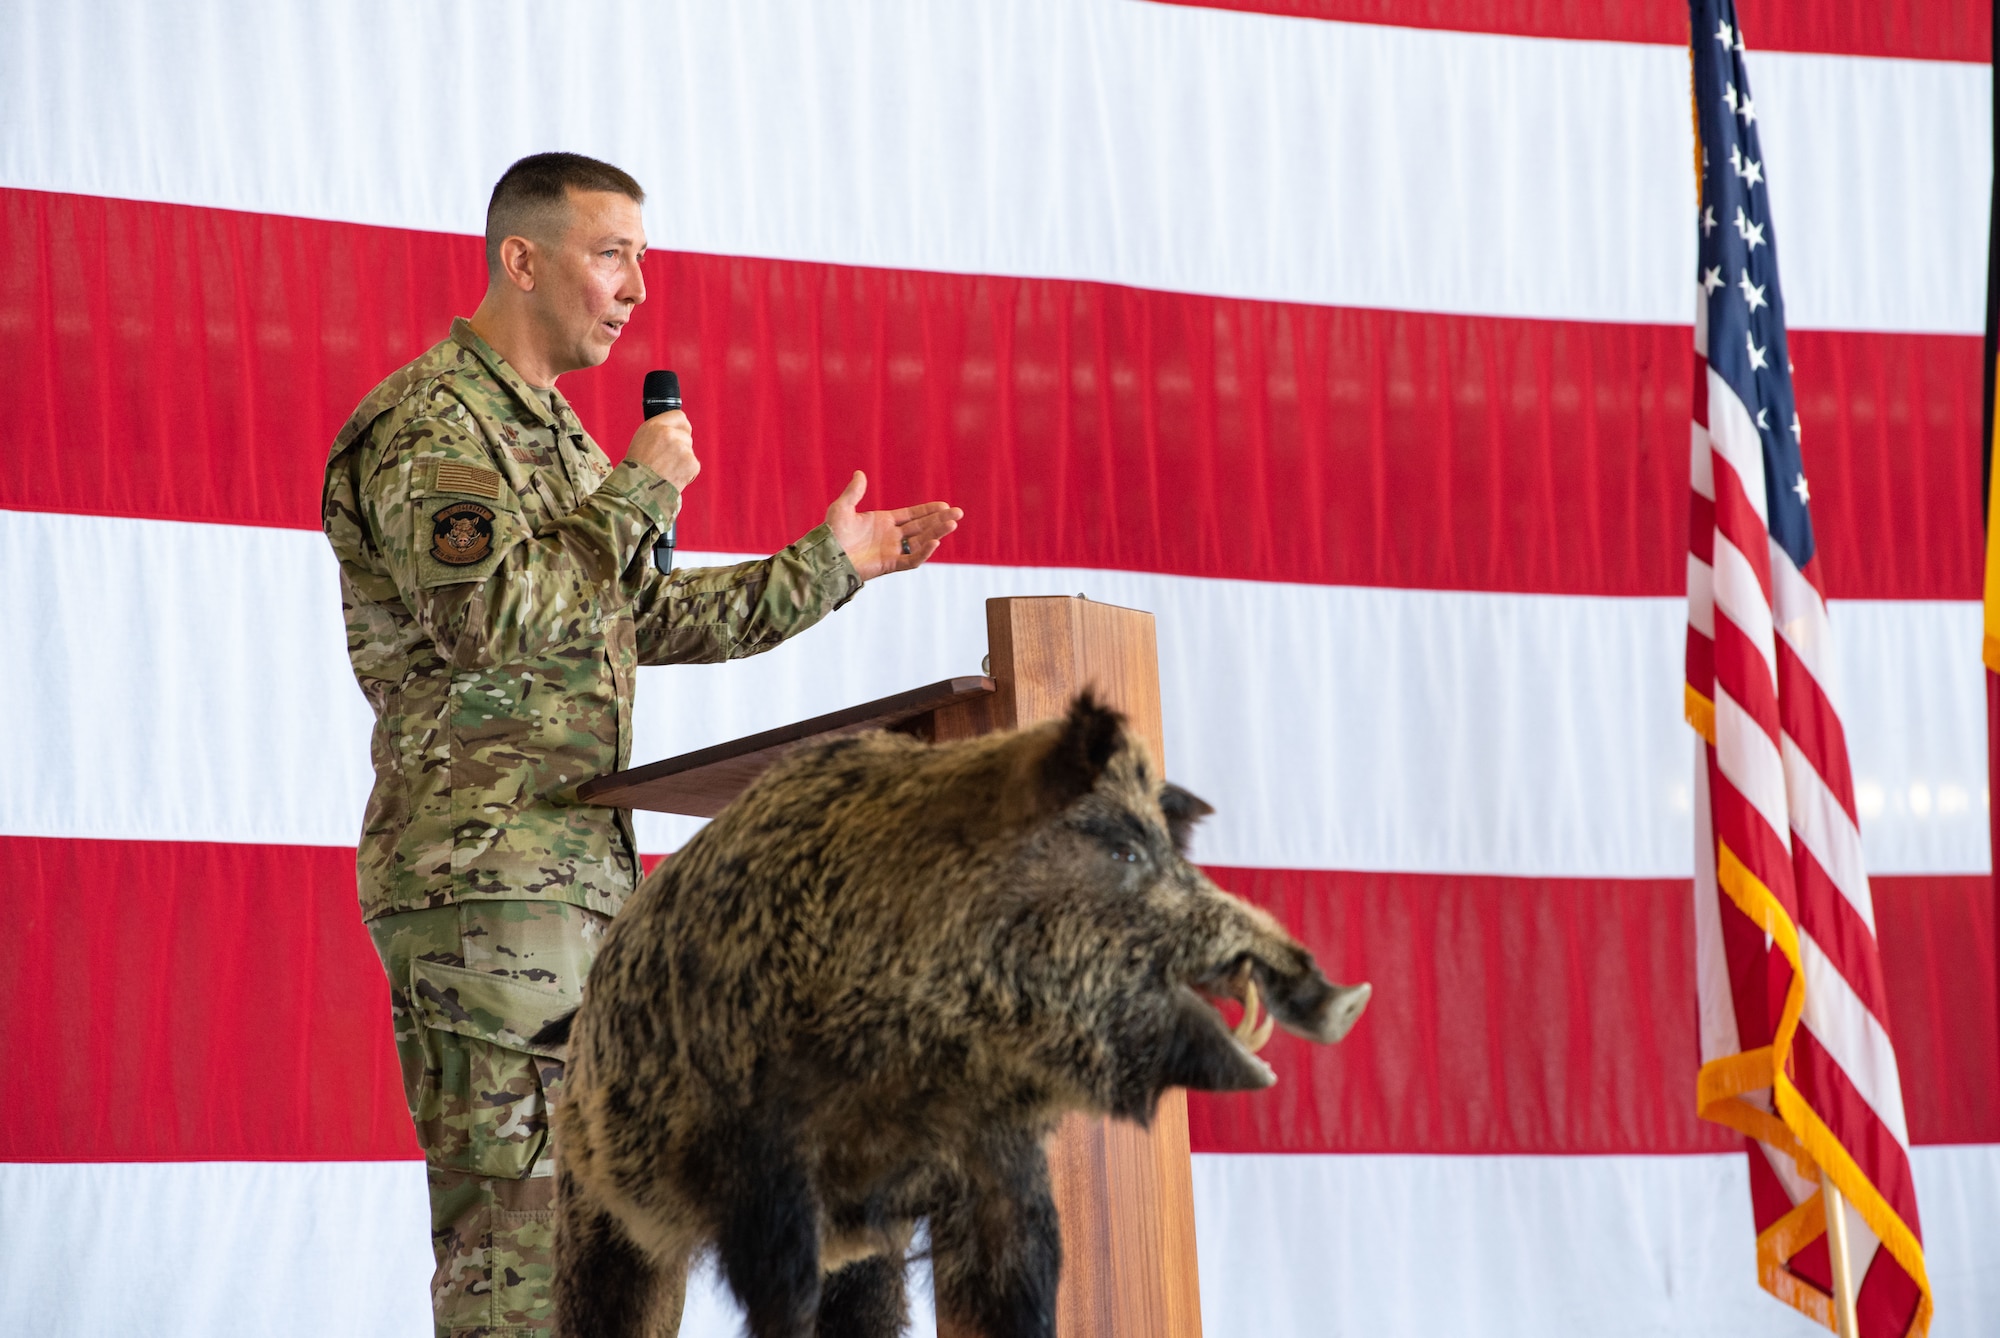 U.S. Air Force Col. Steven Thomas, 86th Civil Engineer Group incoming commander, gives a speech during the 86 CEG change of command ceremony at Ramstein Air Base, Germany